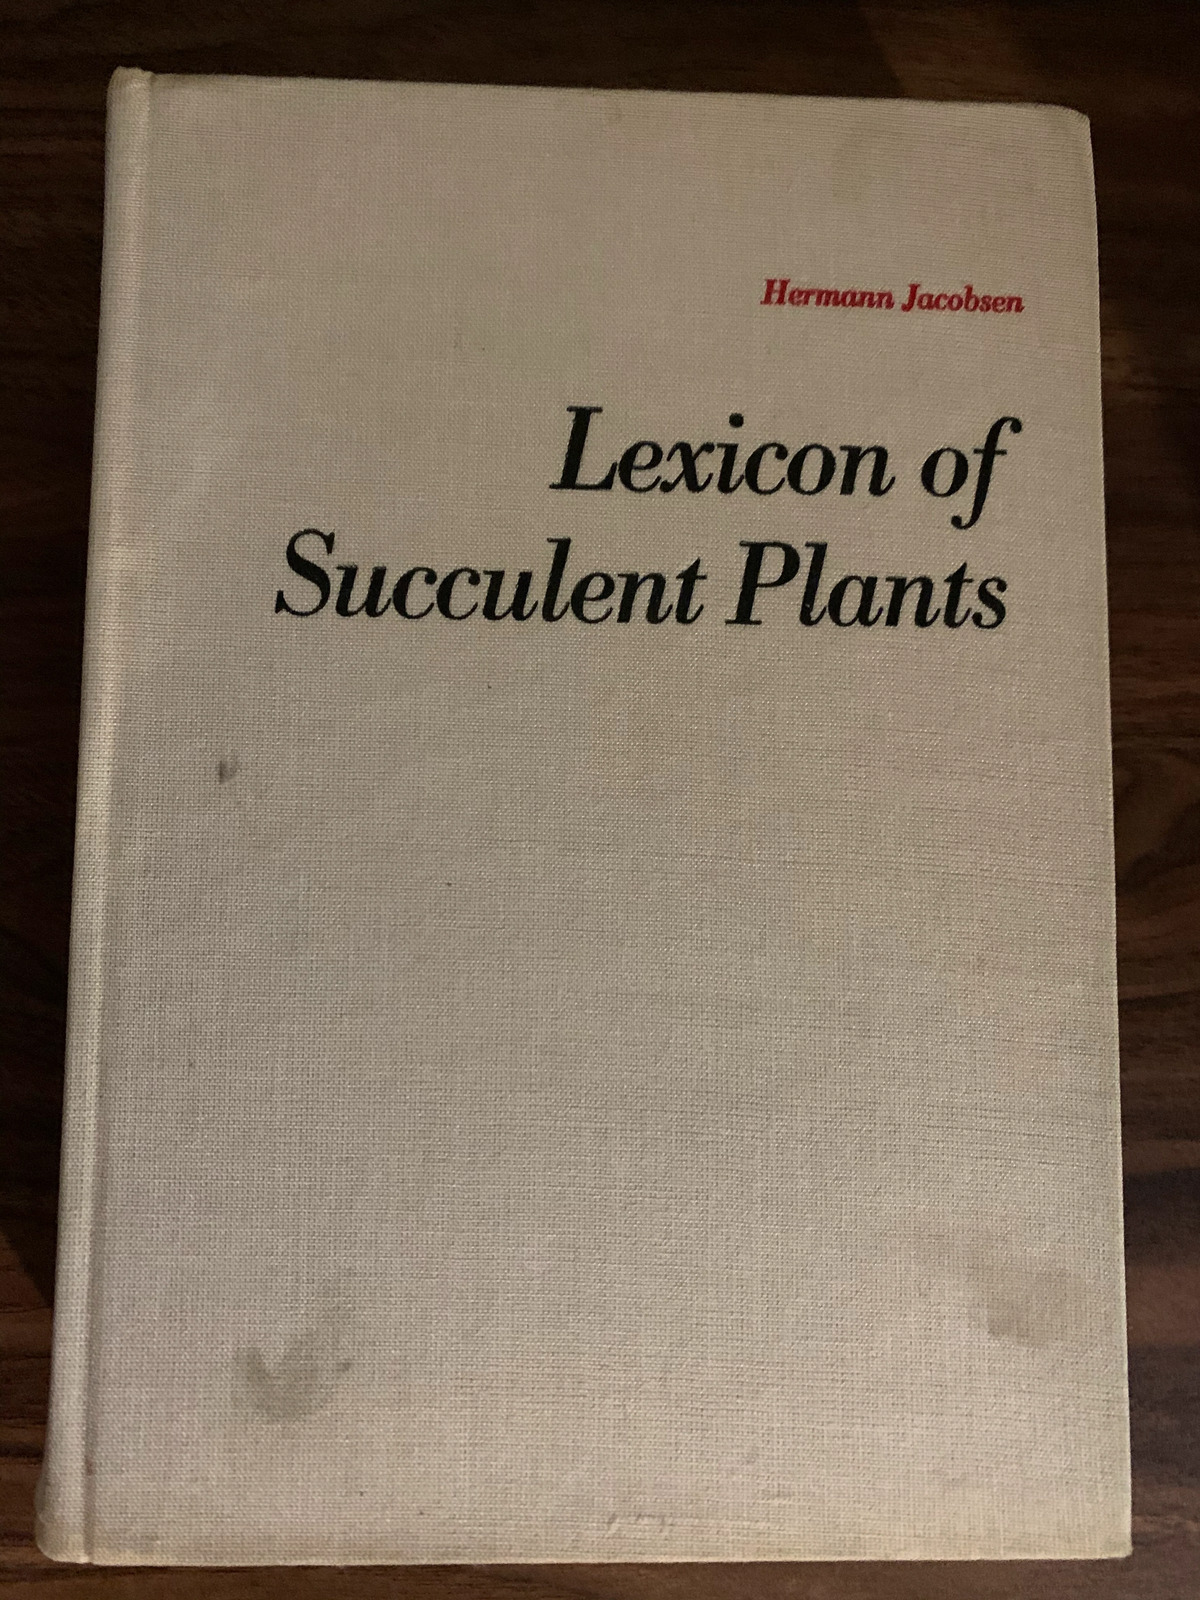 The Lexicon of Succulent Plants by Hermann Jacobsen